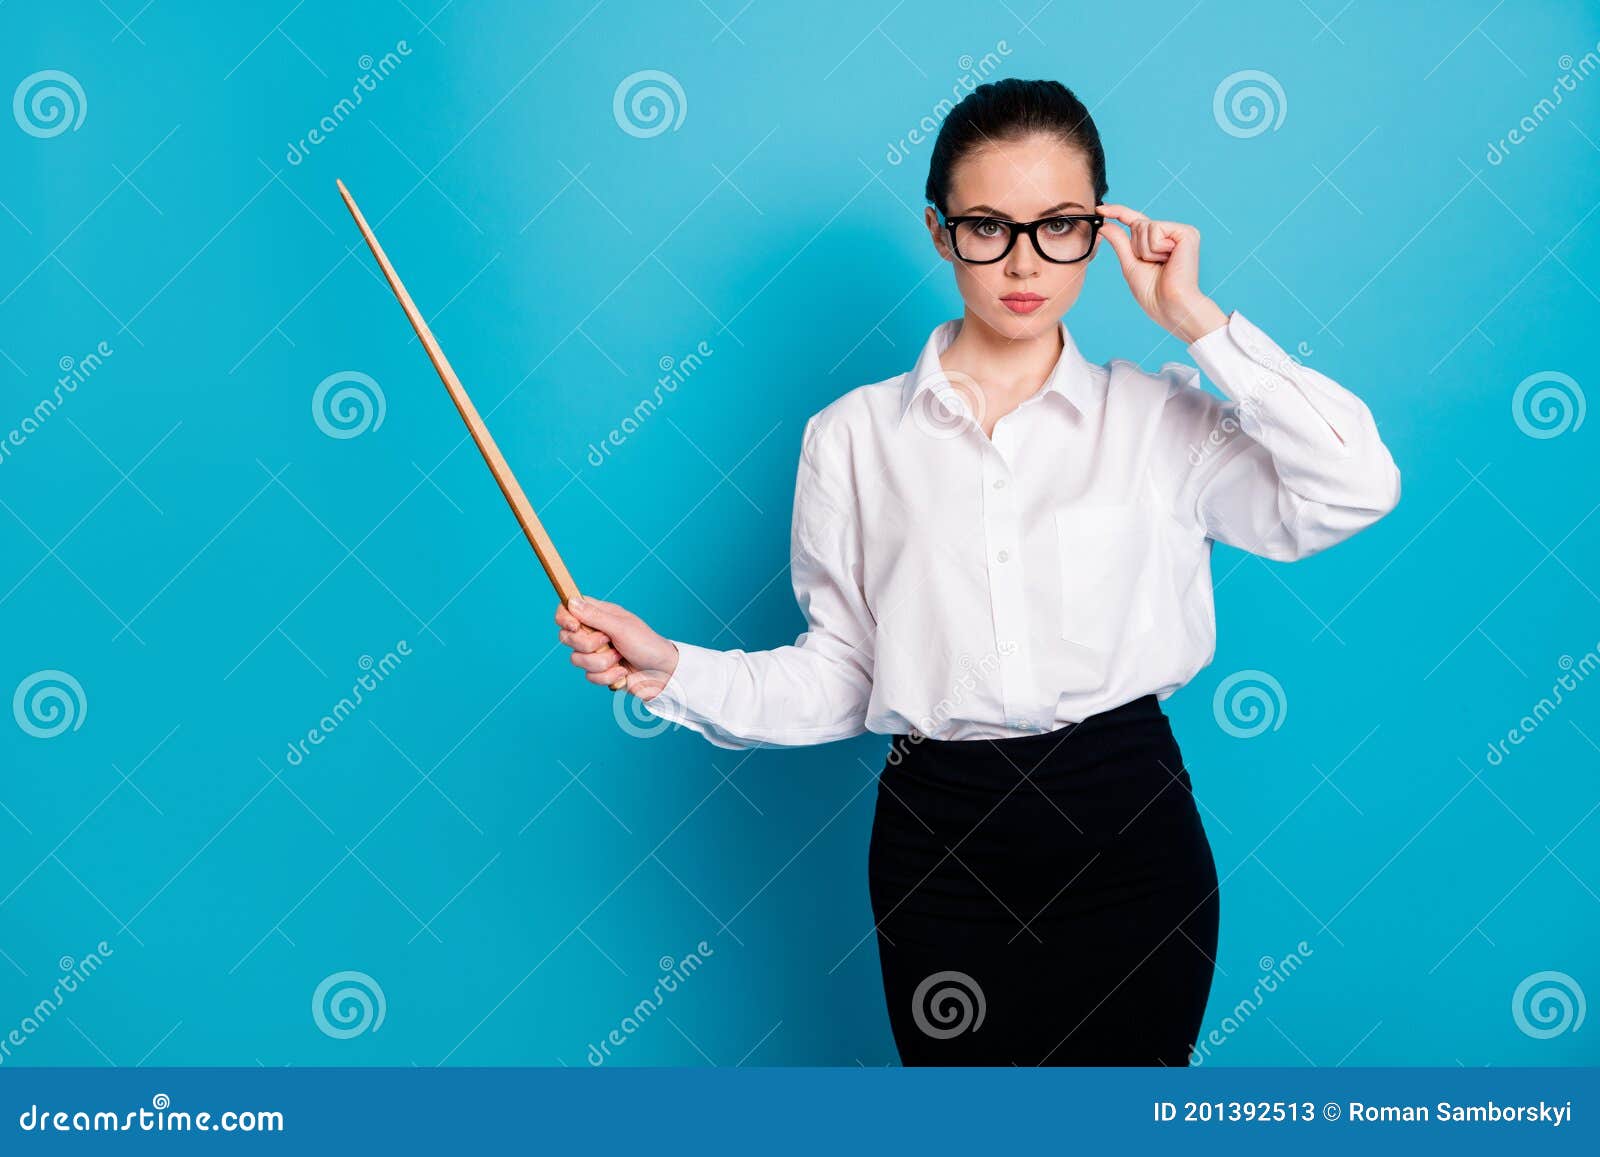 portrait-nice-attractive-smart-stylish-teacher-pointing-wooden-stick-isolated-over-bright-blue-color-background-201392513.jpg